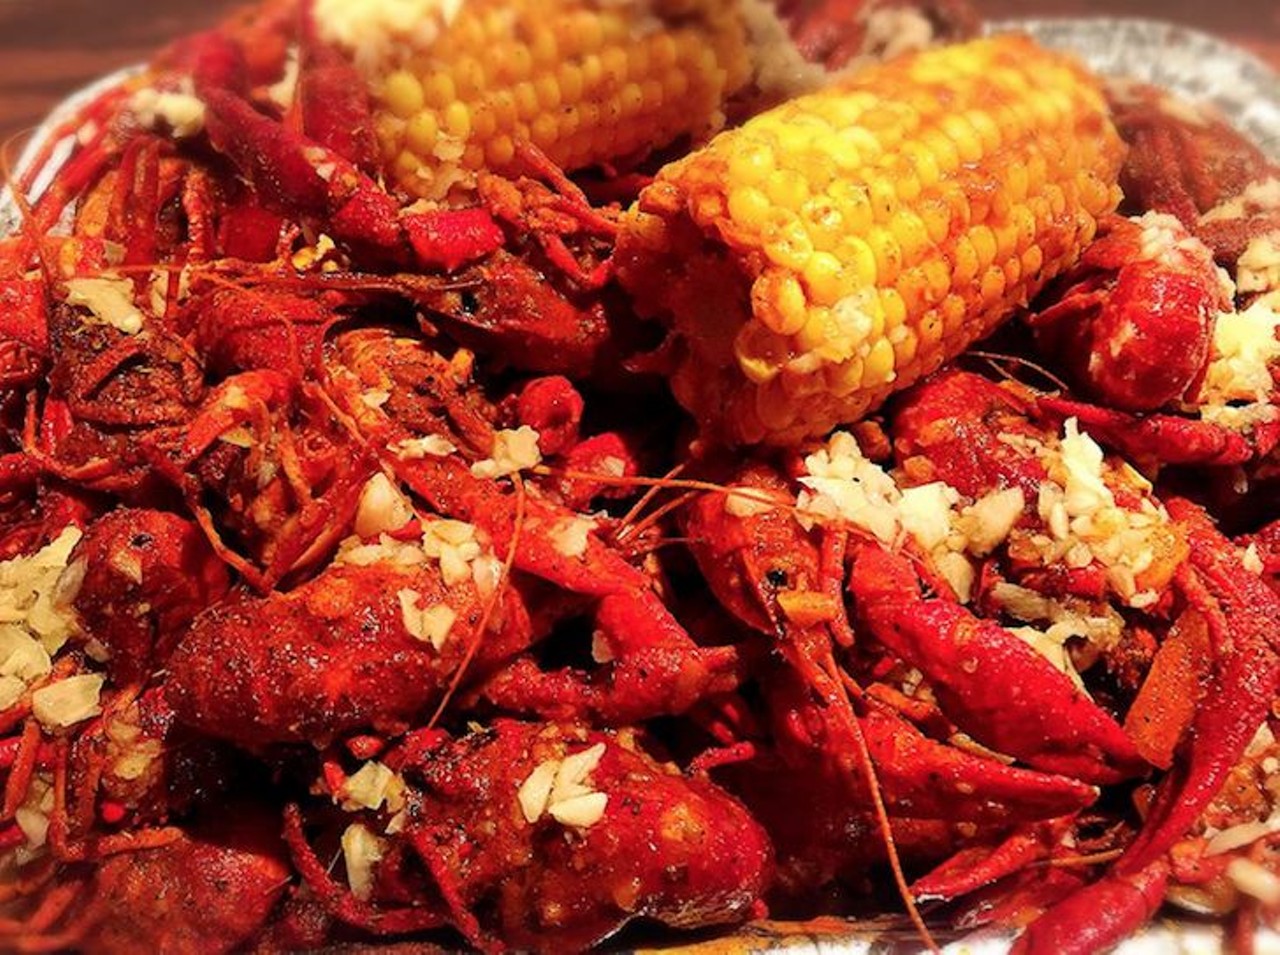 King Cajun Crawfish
914 N. Mills Ave. | 407-704-8863
A host of seasoning choices, top-notch sides and cut-rate prices make this Cajun dive a real draw for diners craving crawfish boils. Other NOLA staples are hit (catfish po&#146;boy) and miss (gumbo). End with a strong cup of Cafe? du Monde coffee.
Photo via King Cajun Crawfish of Orlando/Facebook